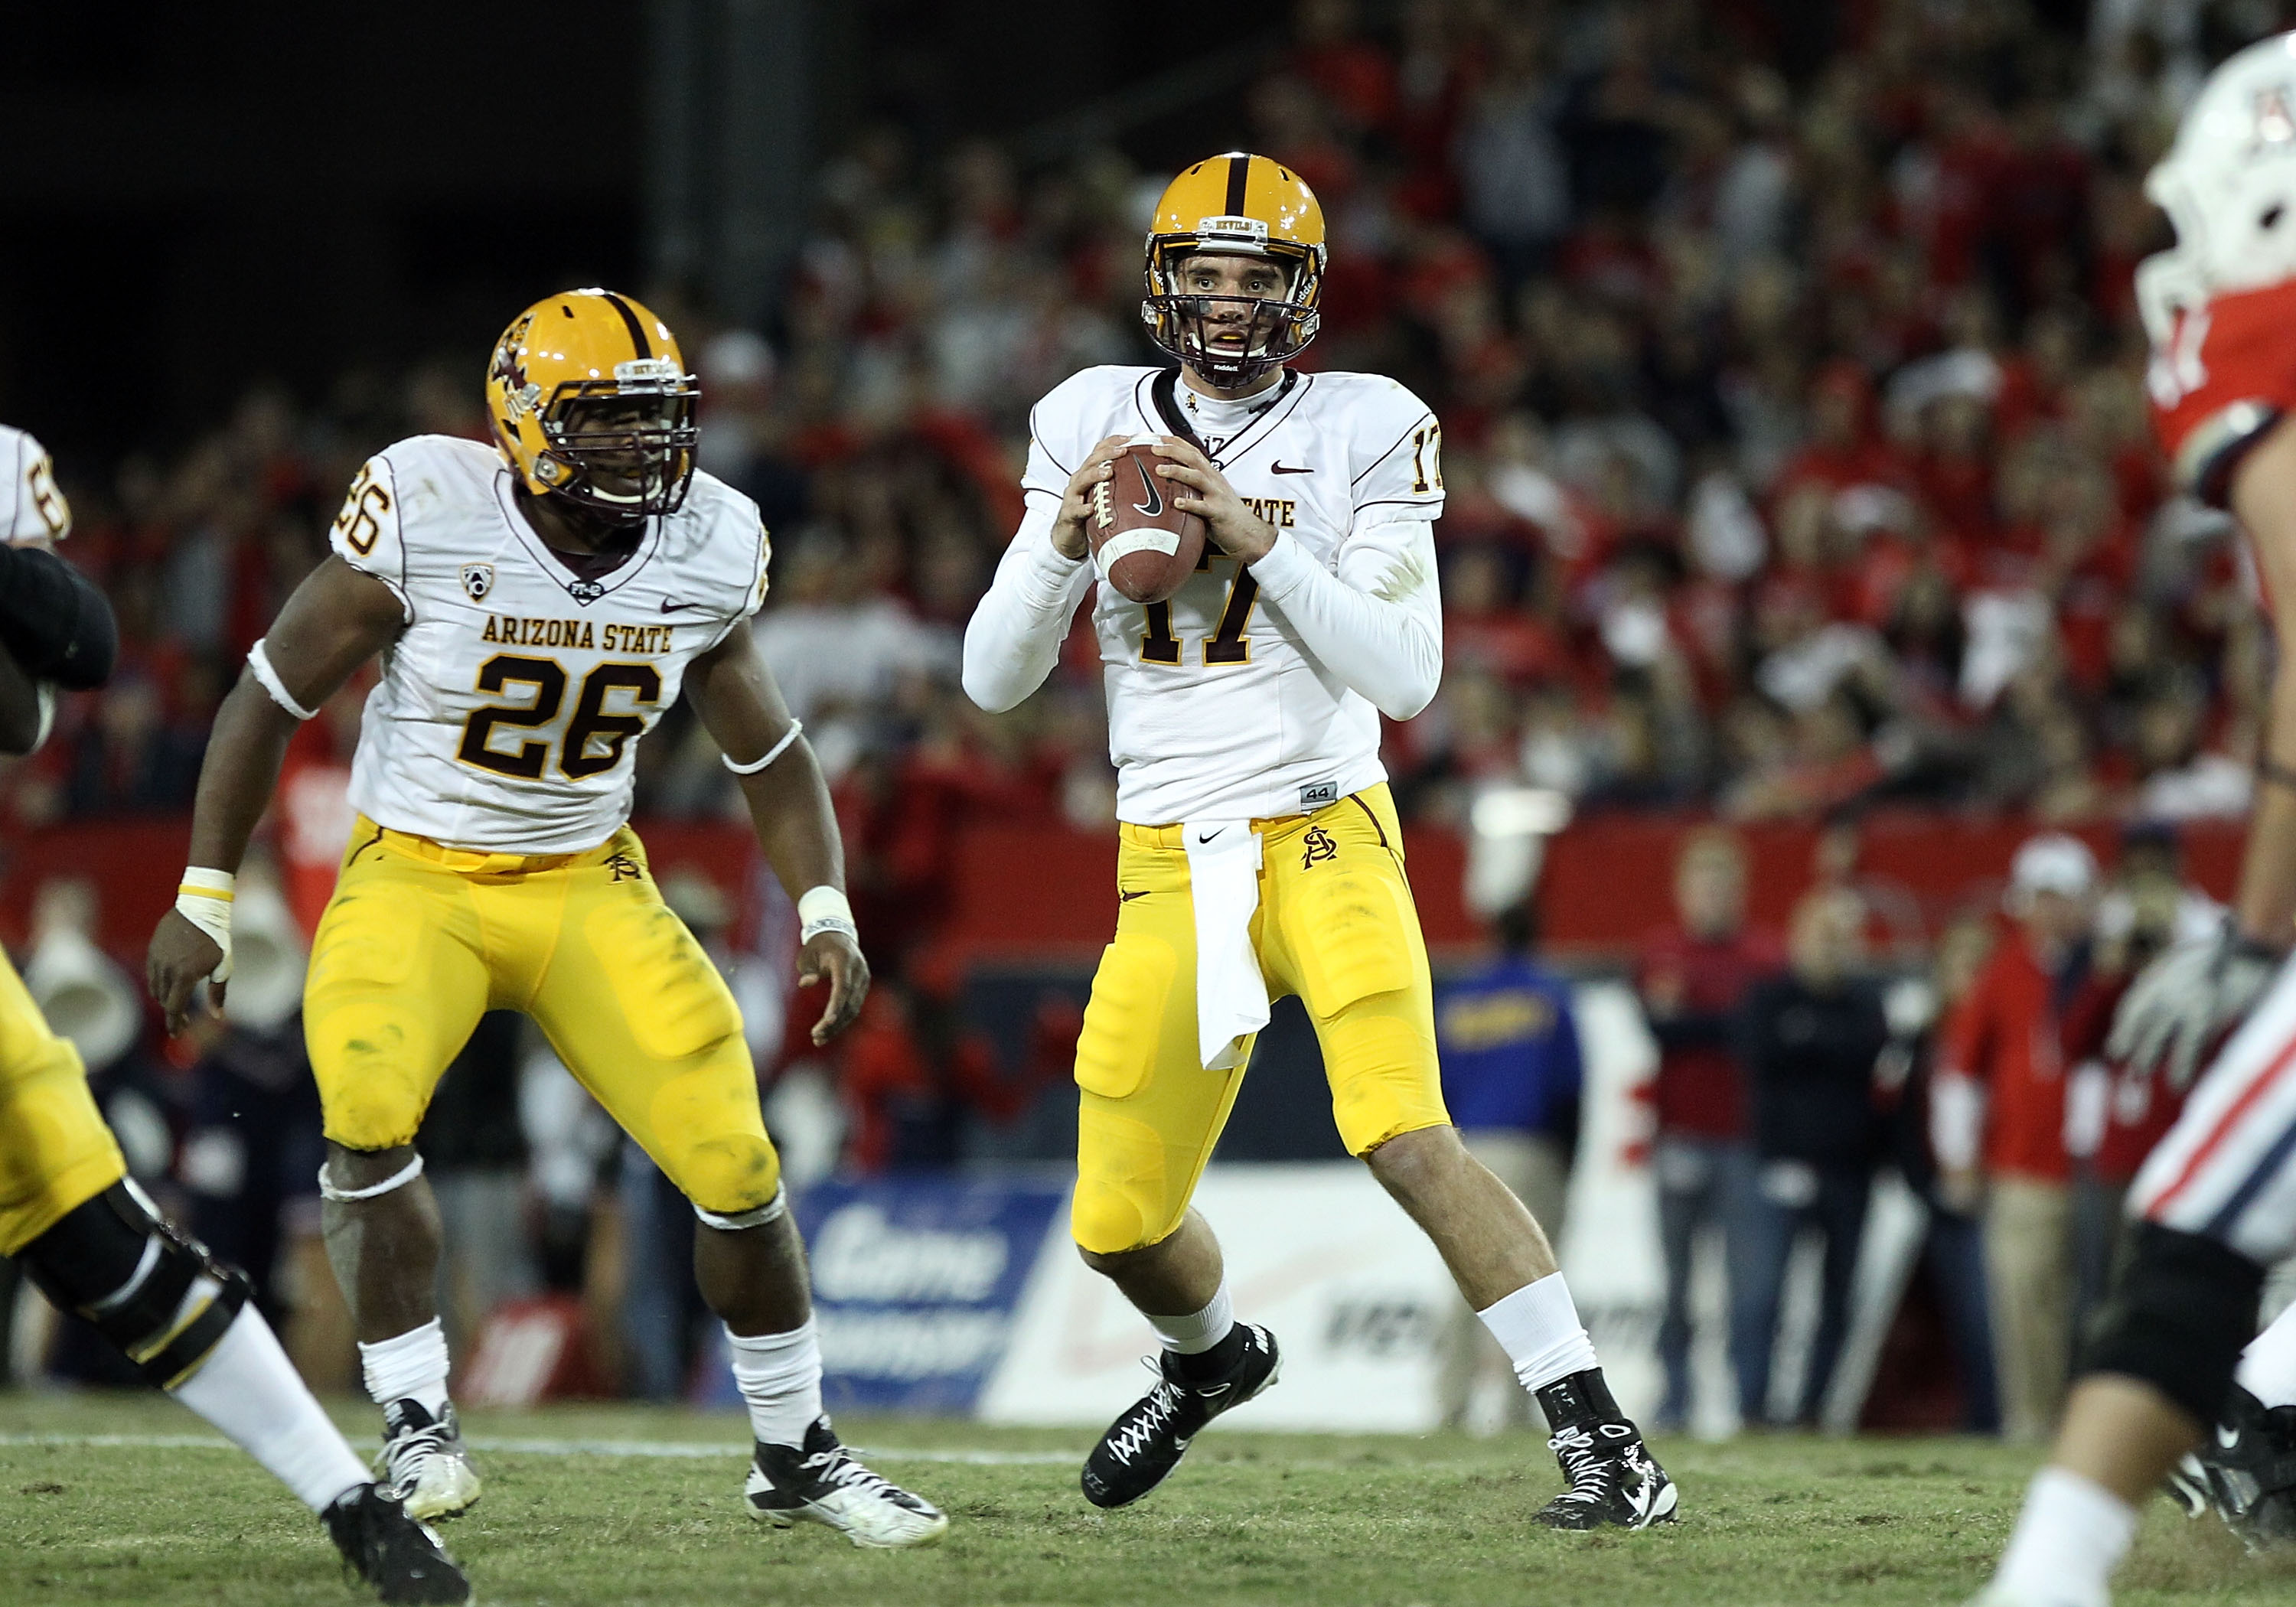 TUCSON, AZ - DECEMBER 02:  Quarterback Brock Osweiler #17 of the Arizona State Sun Devils scrambles with the football during the college football game at Arizona Stadium on December 2, 2010 in Tucson, Arizona. The Sun Devils defeated the Wildcats 30-29 in